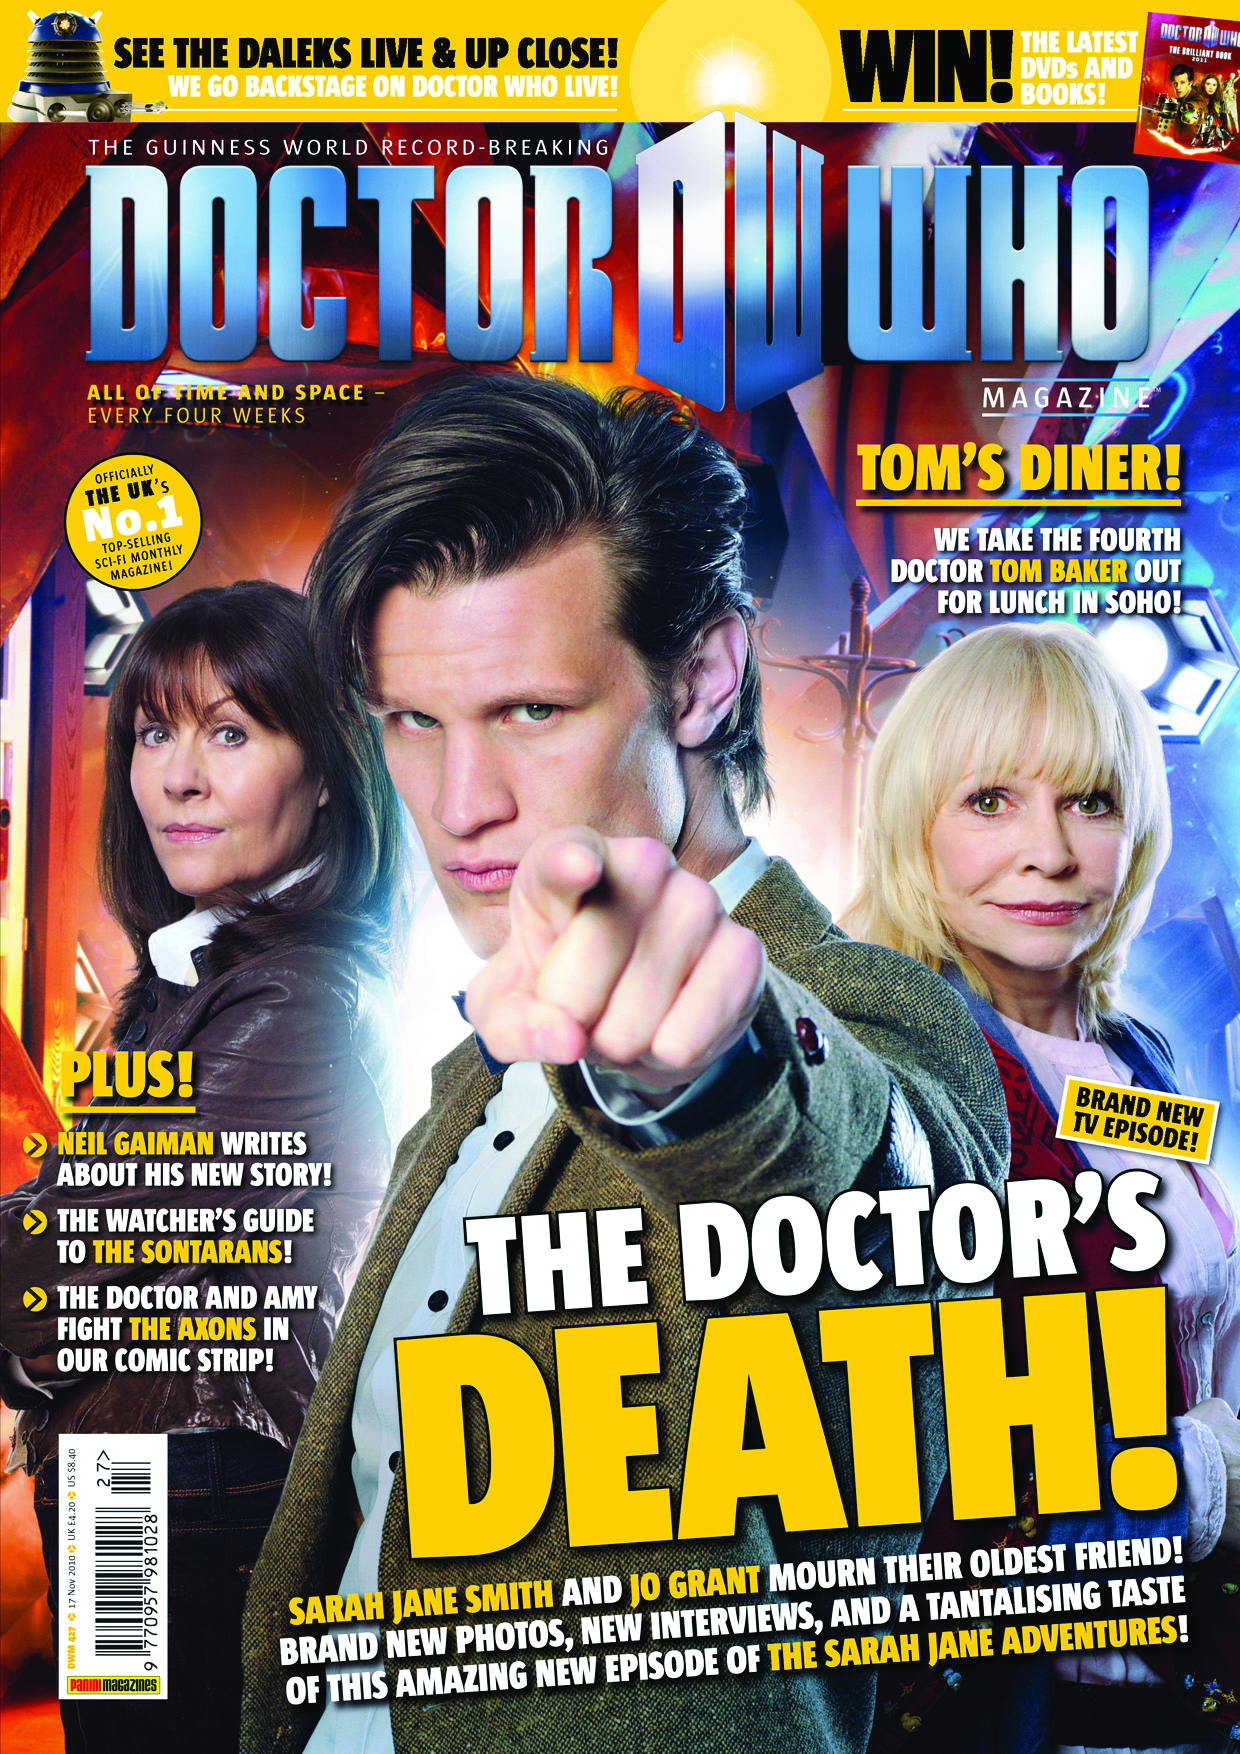 DOCTOR WHO MAGAZINE #431 (NOTE PRICE)